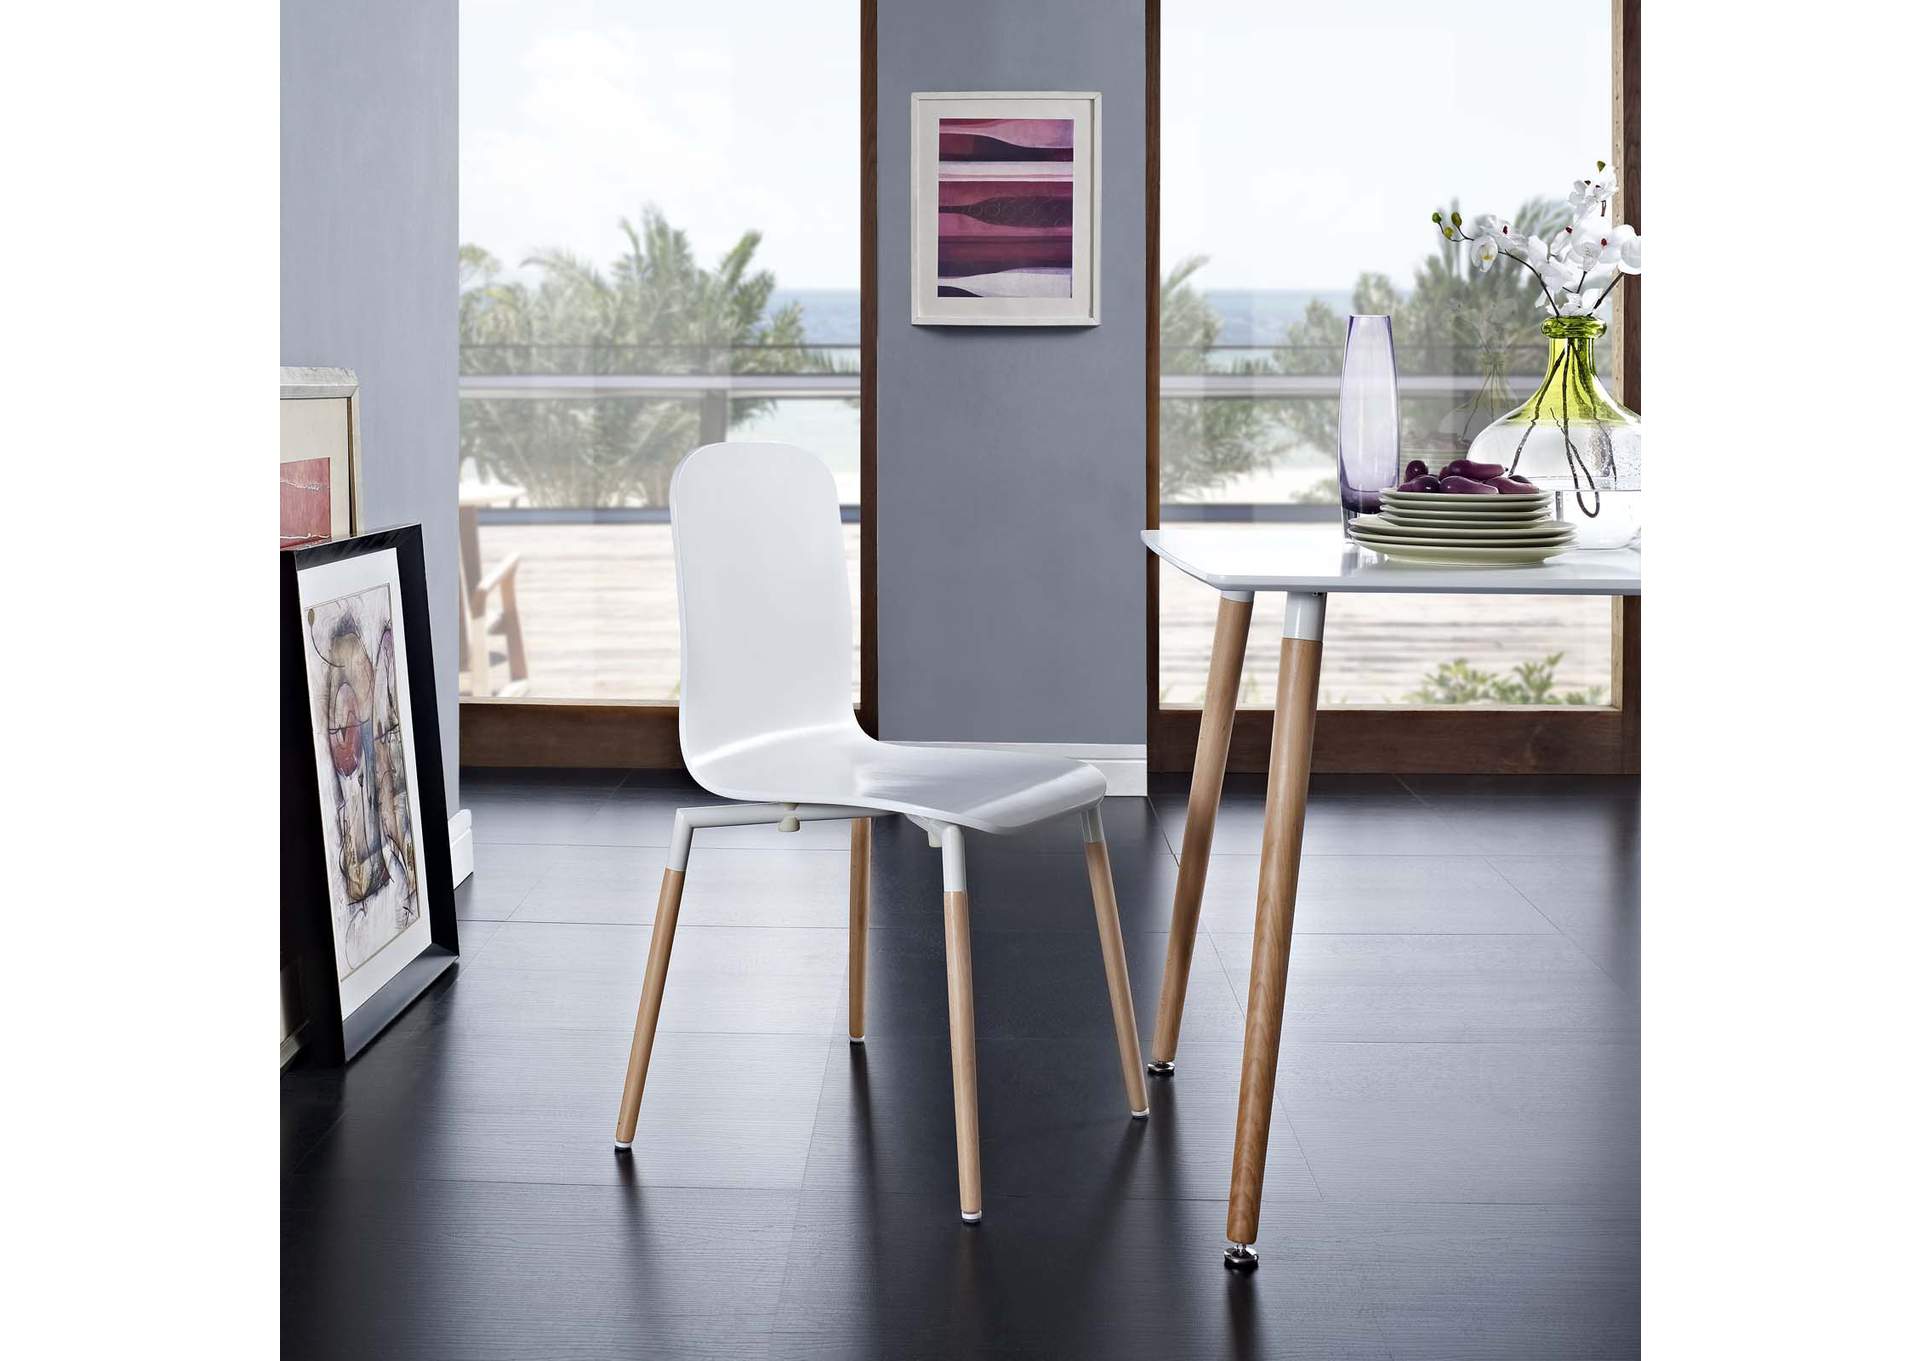 White Stack Dining Wood Side Chair,Modway